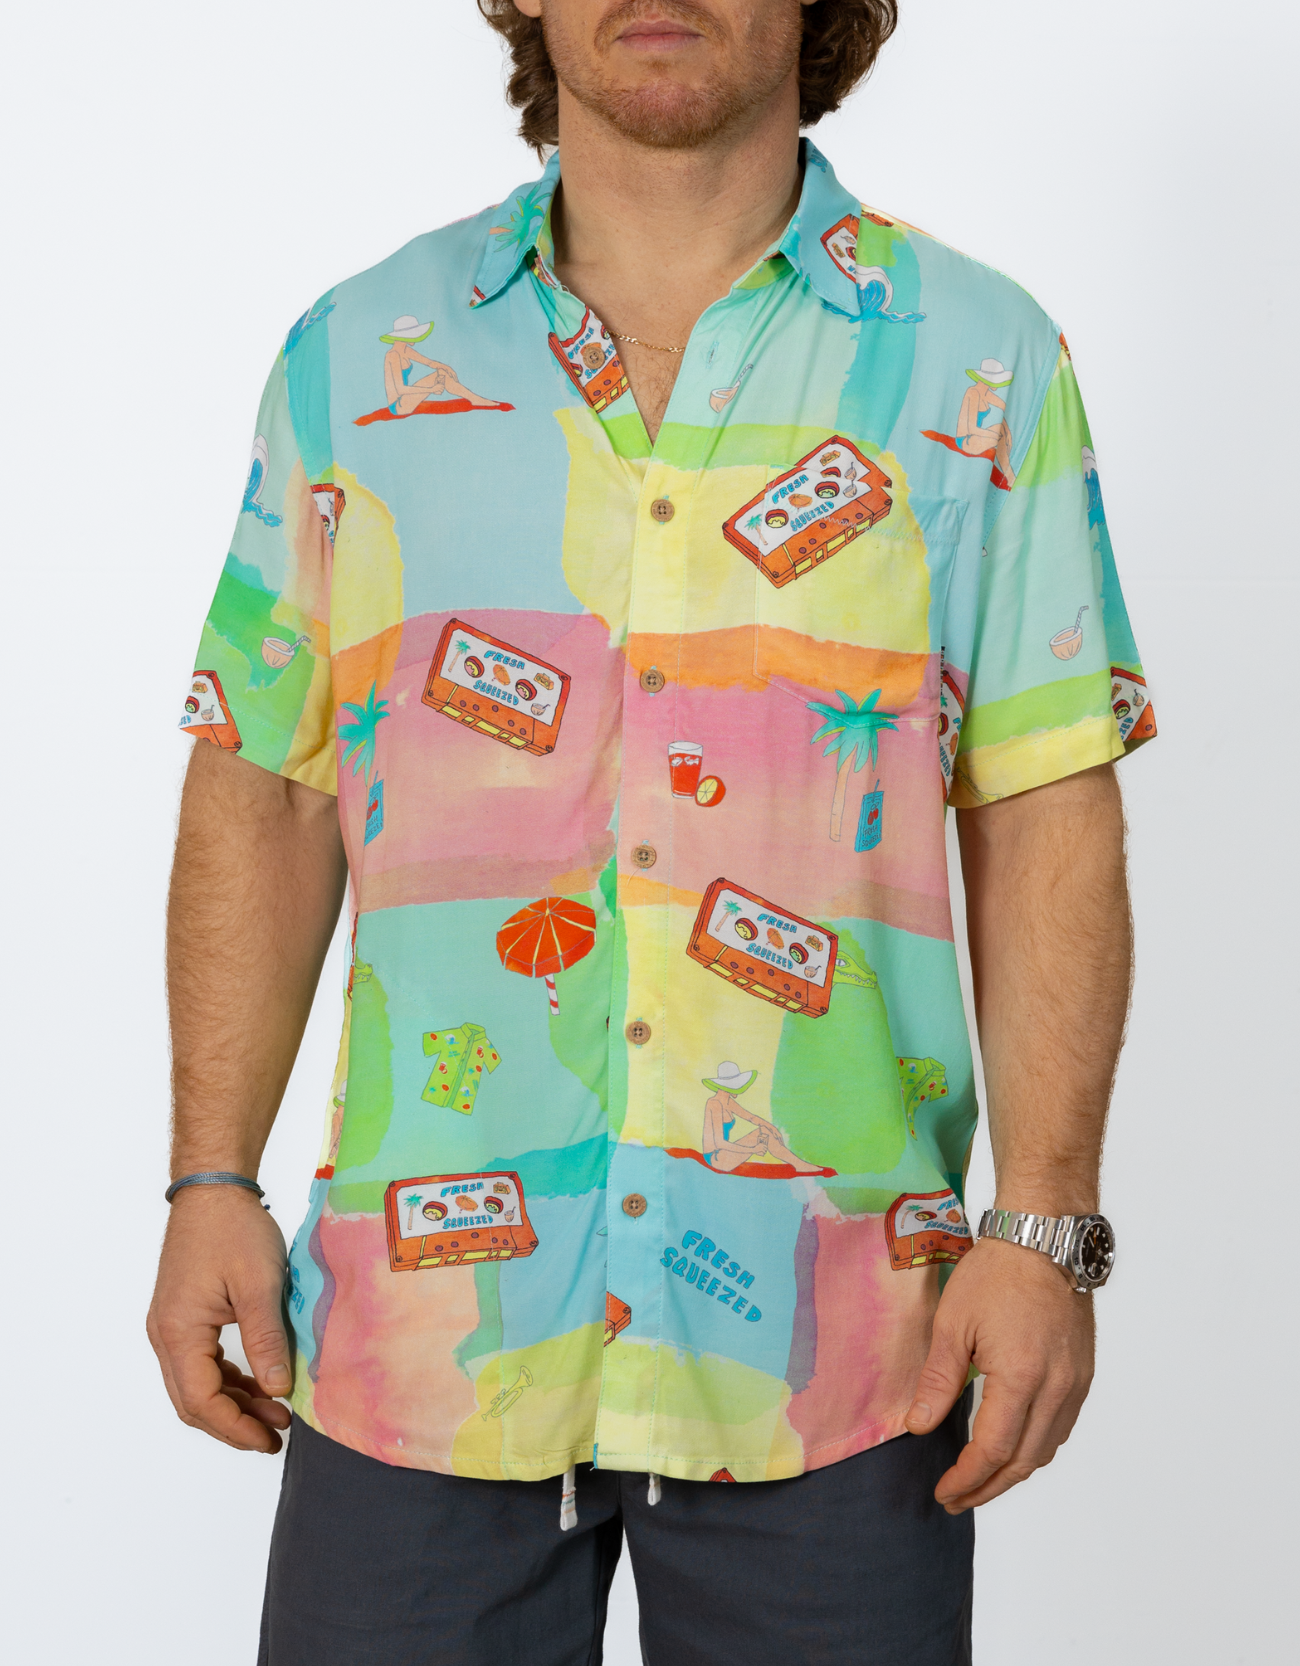 FRESH SQUEEZED - NIGHTHAWK™ BUTTON UP